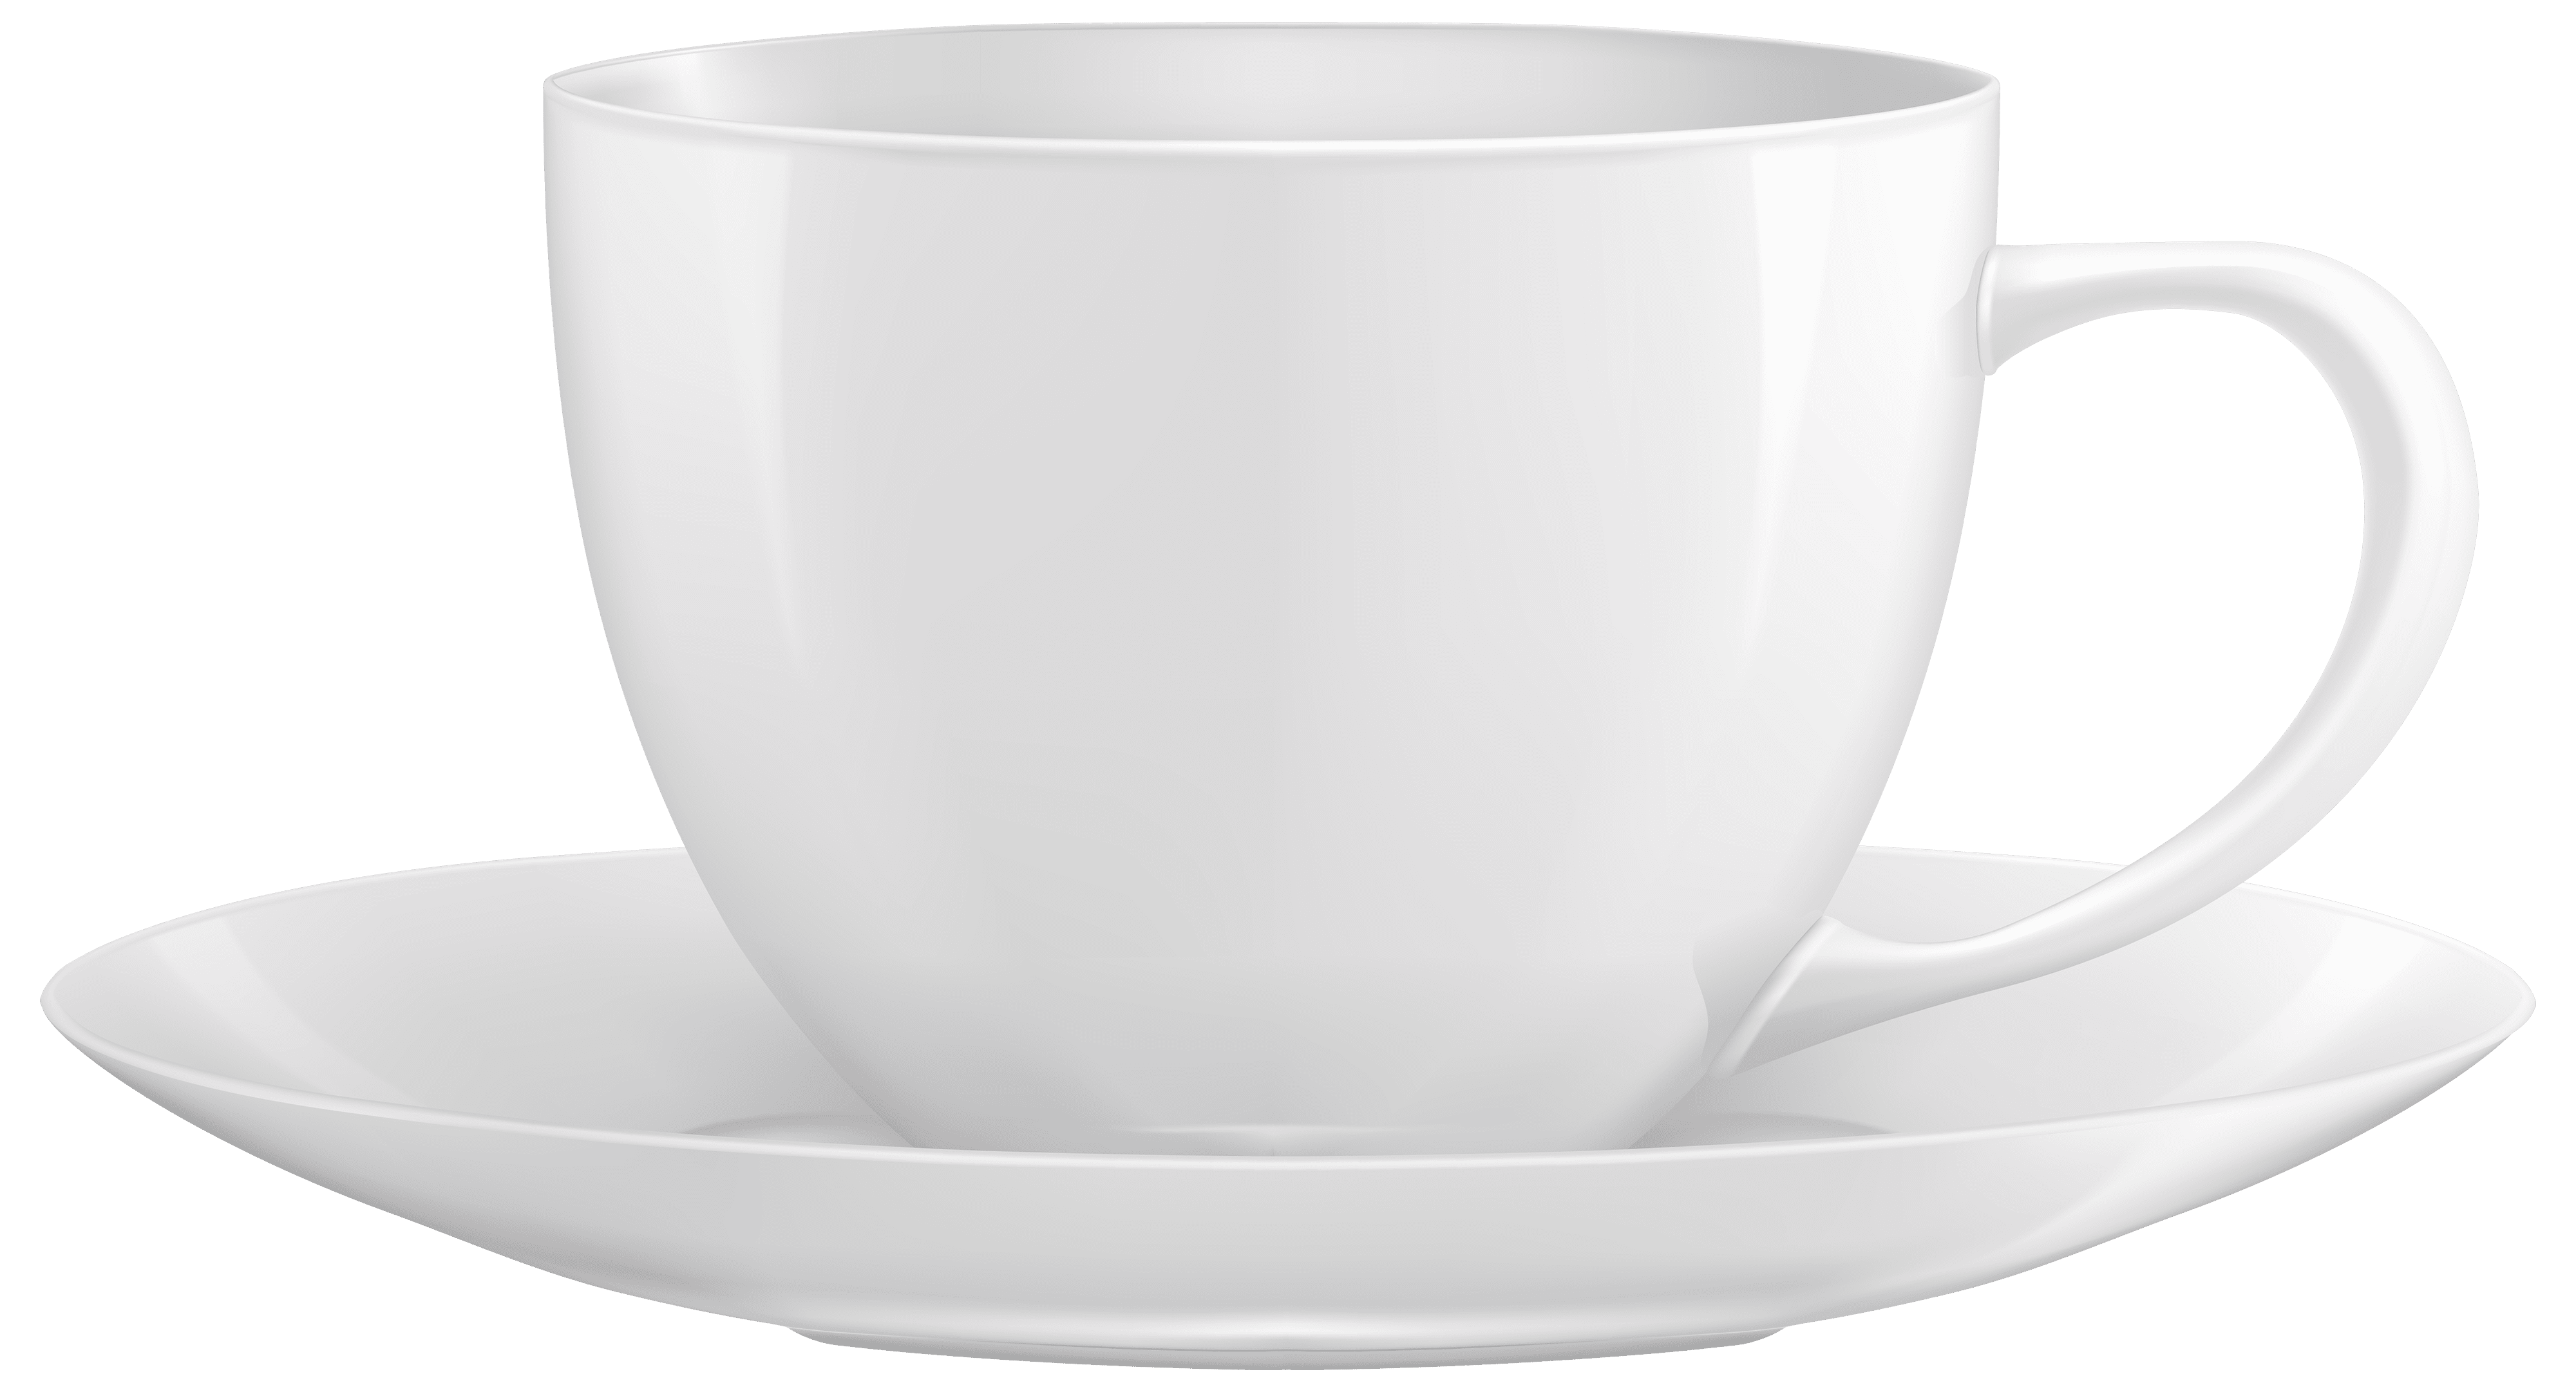 Empty Cup PNG Images Transparent Free Download PNGMart